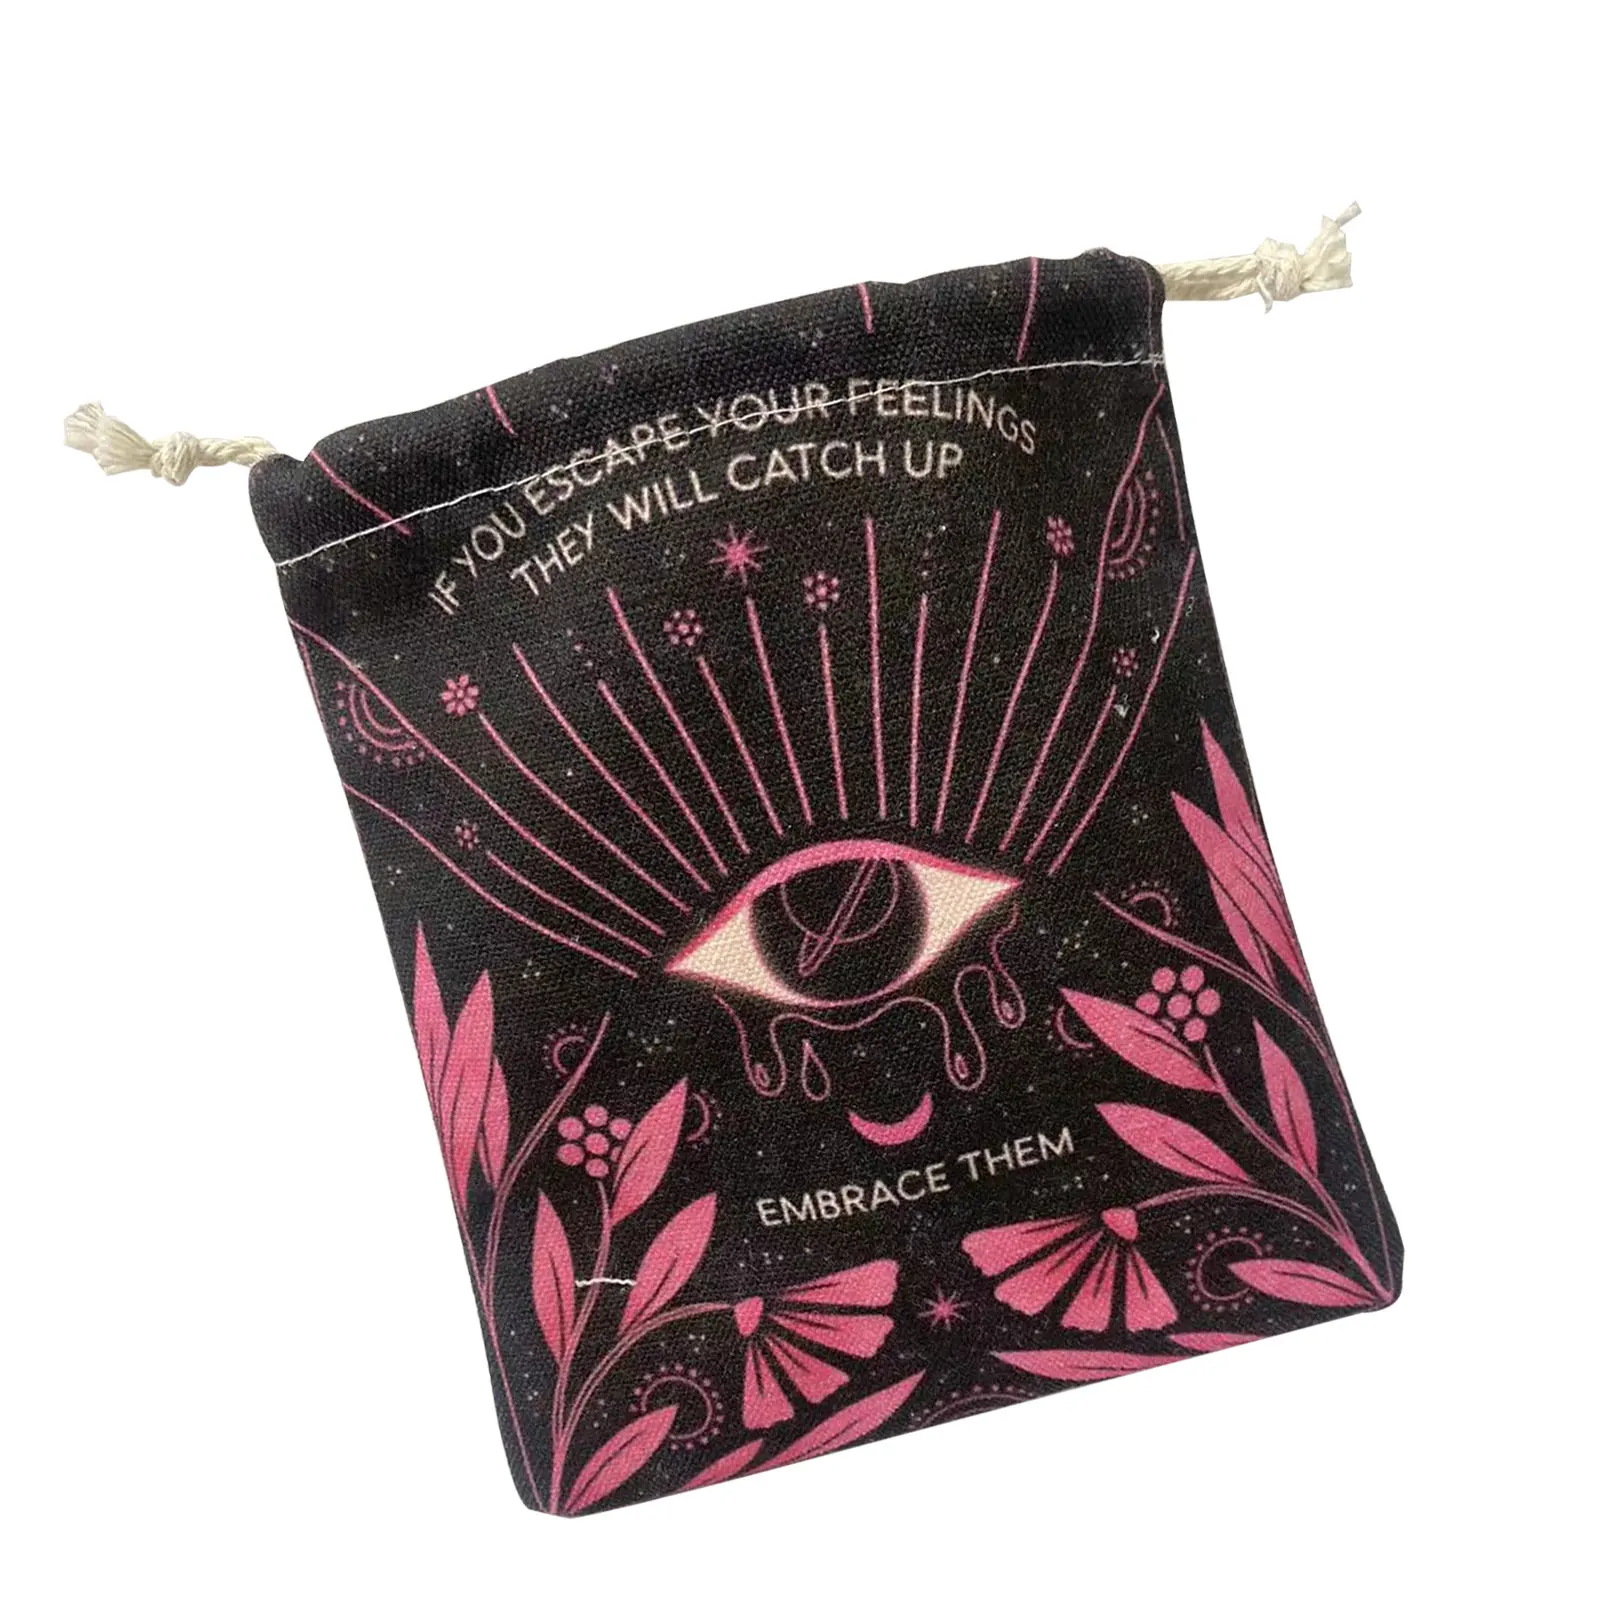 

Tarot Card Bag Elegant Bag Soft Comfortable Party Favor For Dice Jewelry Crystals Drawstring Design Prevent Loss Of Valuables